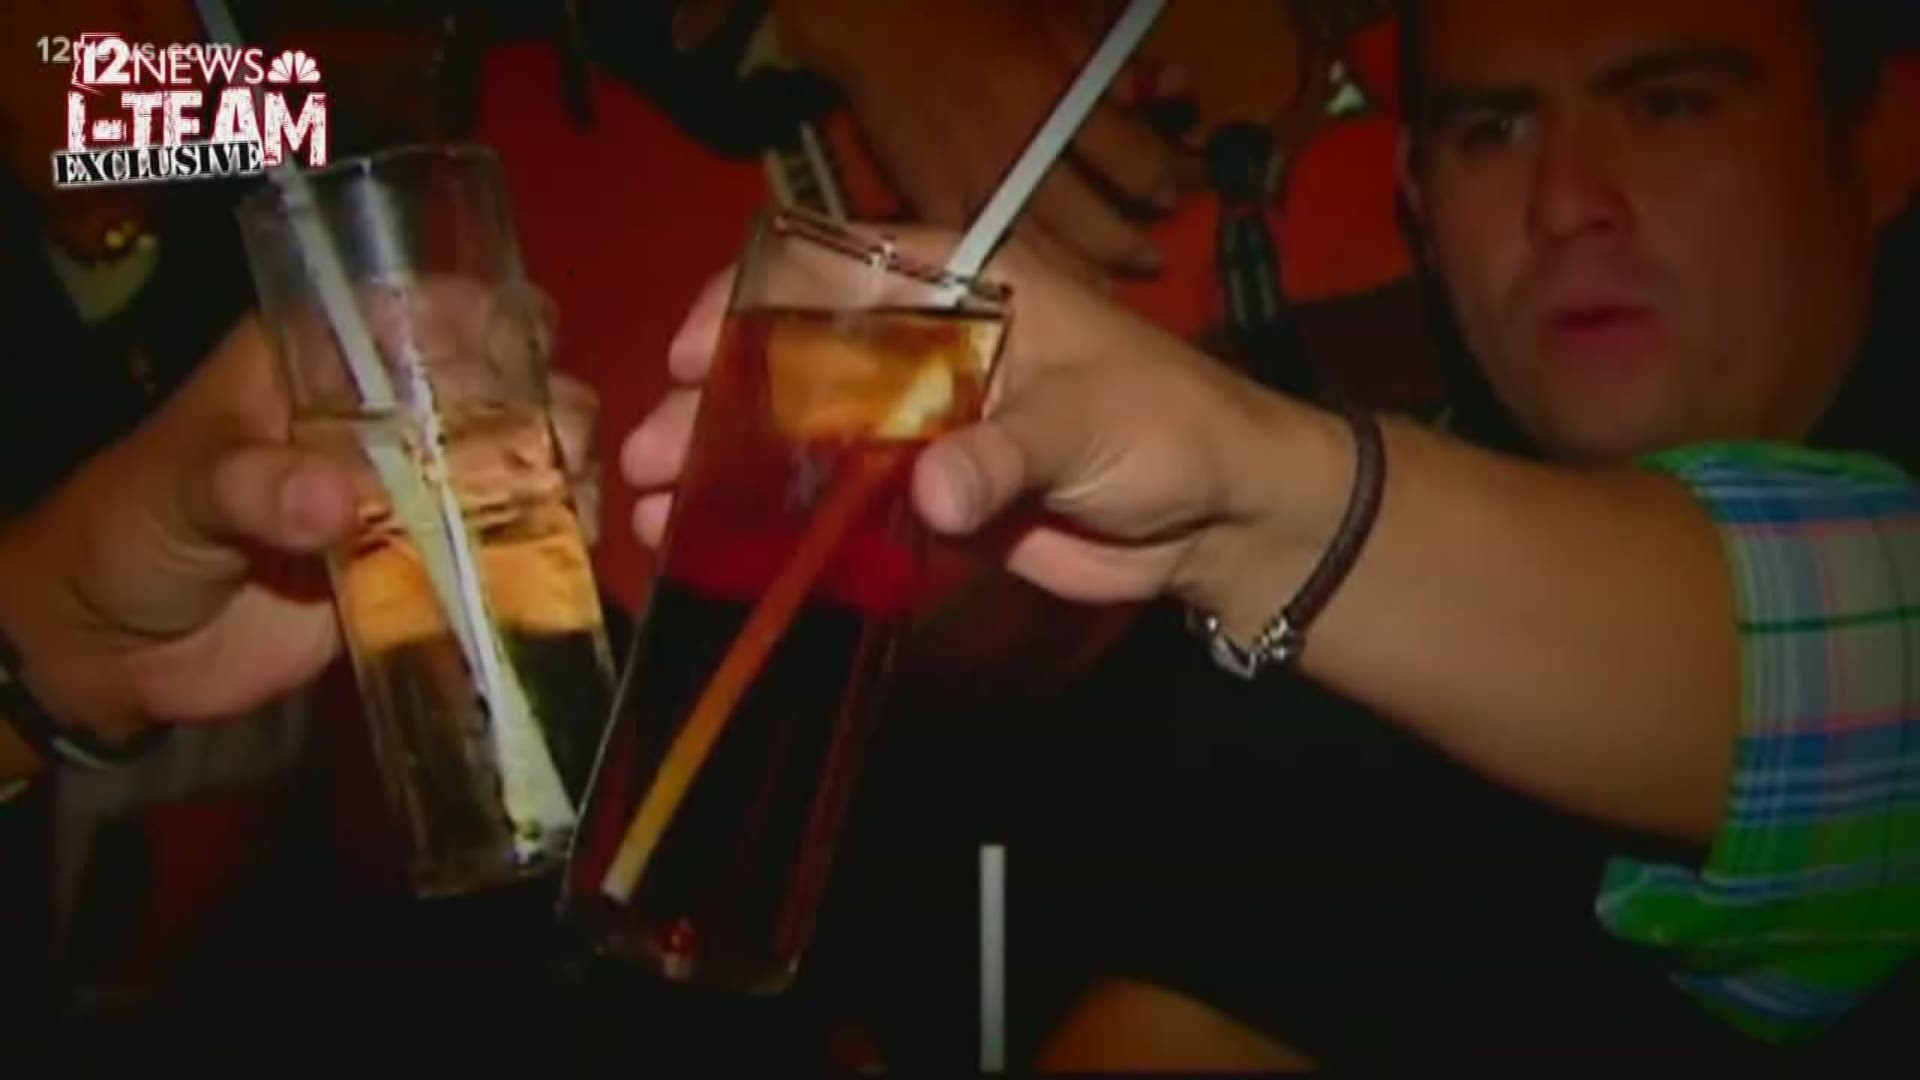 A new travel warning about possible tainted alcohol in the Cancun area.